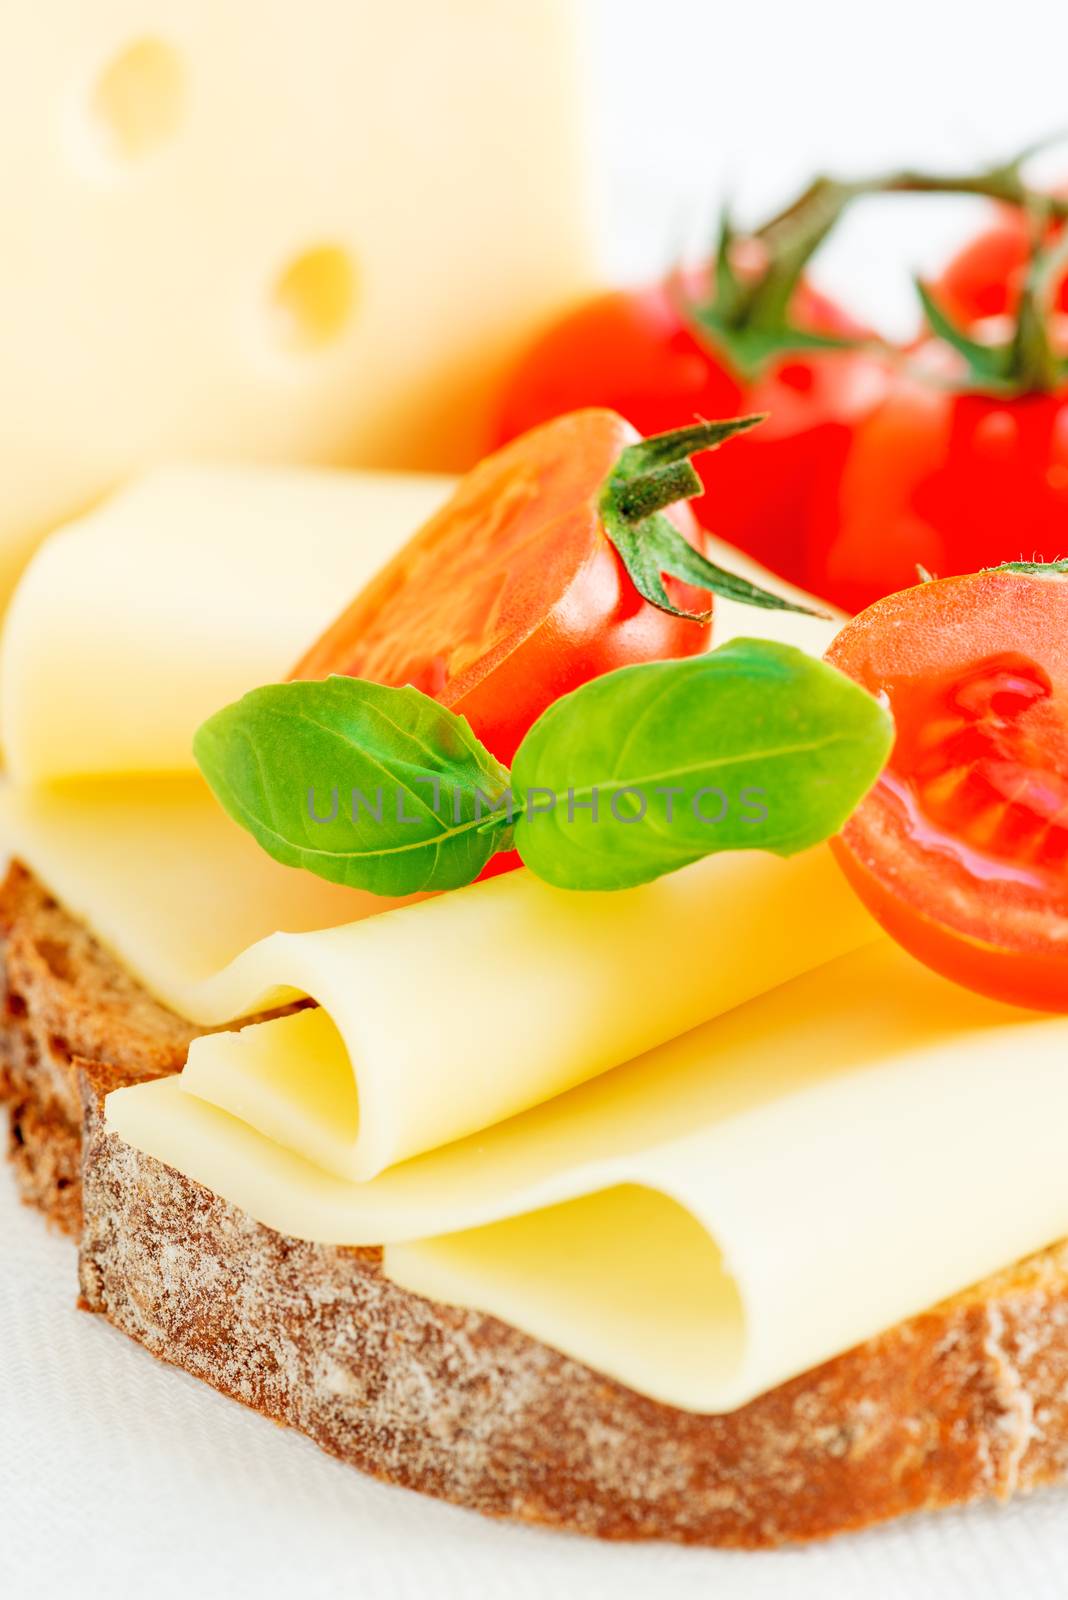 Cheese sandwich with tomato and basil